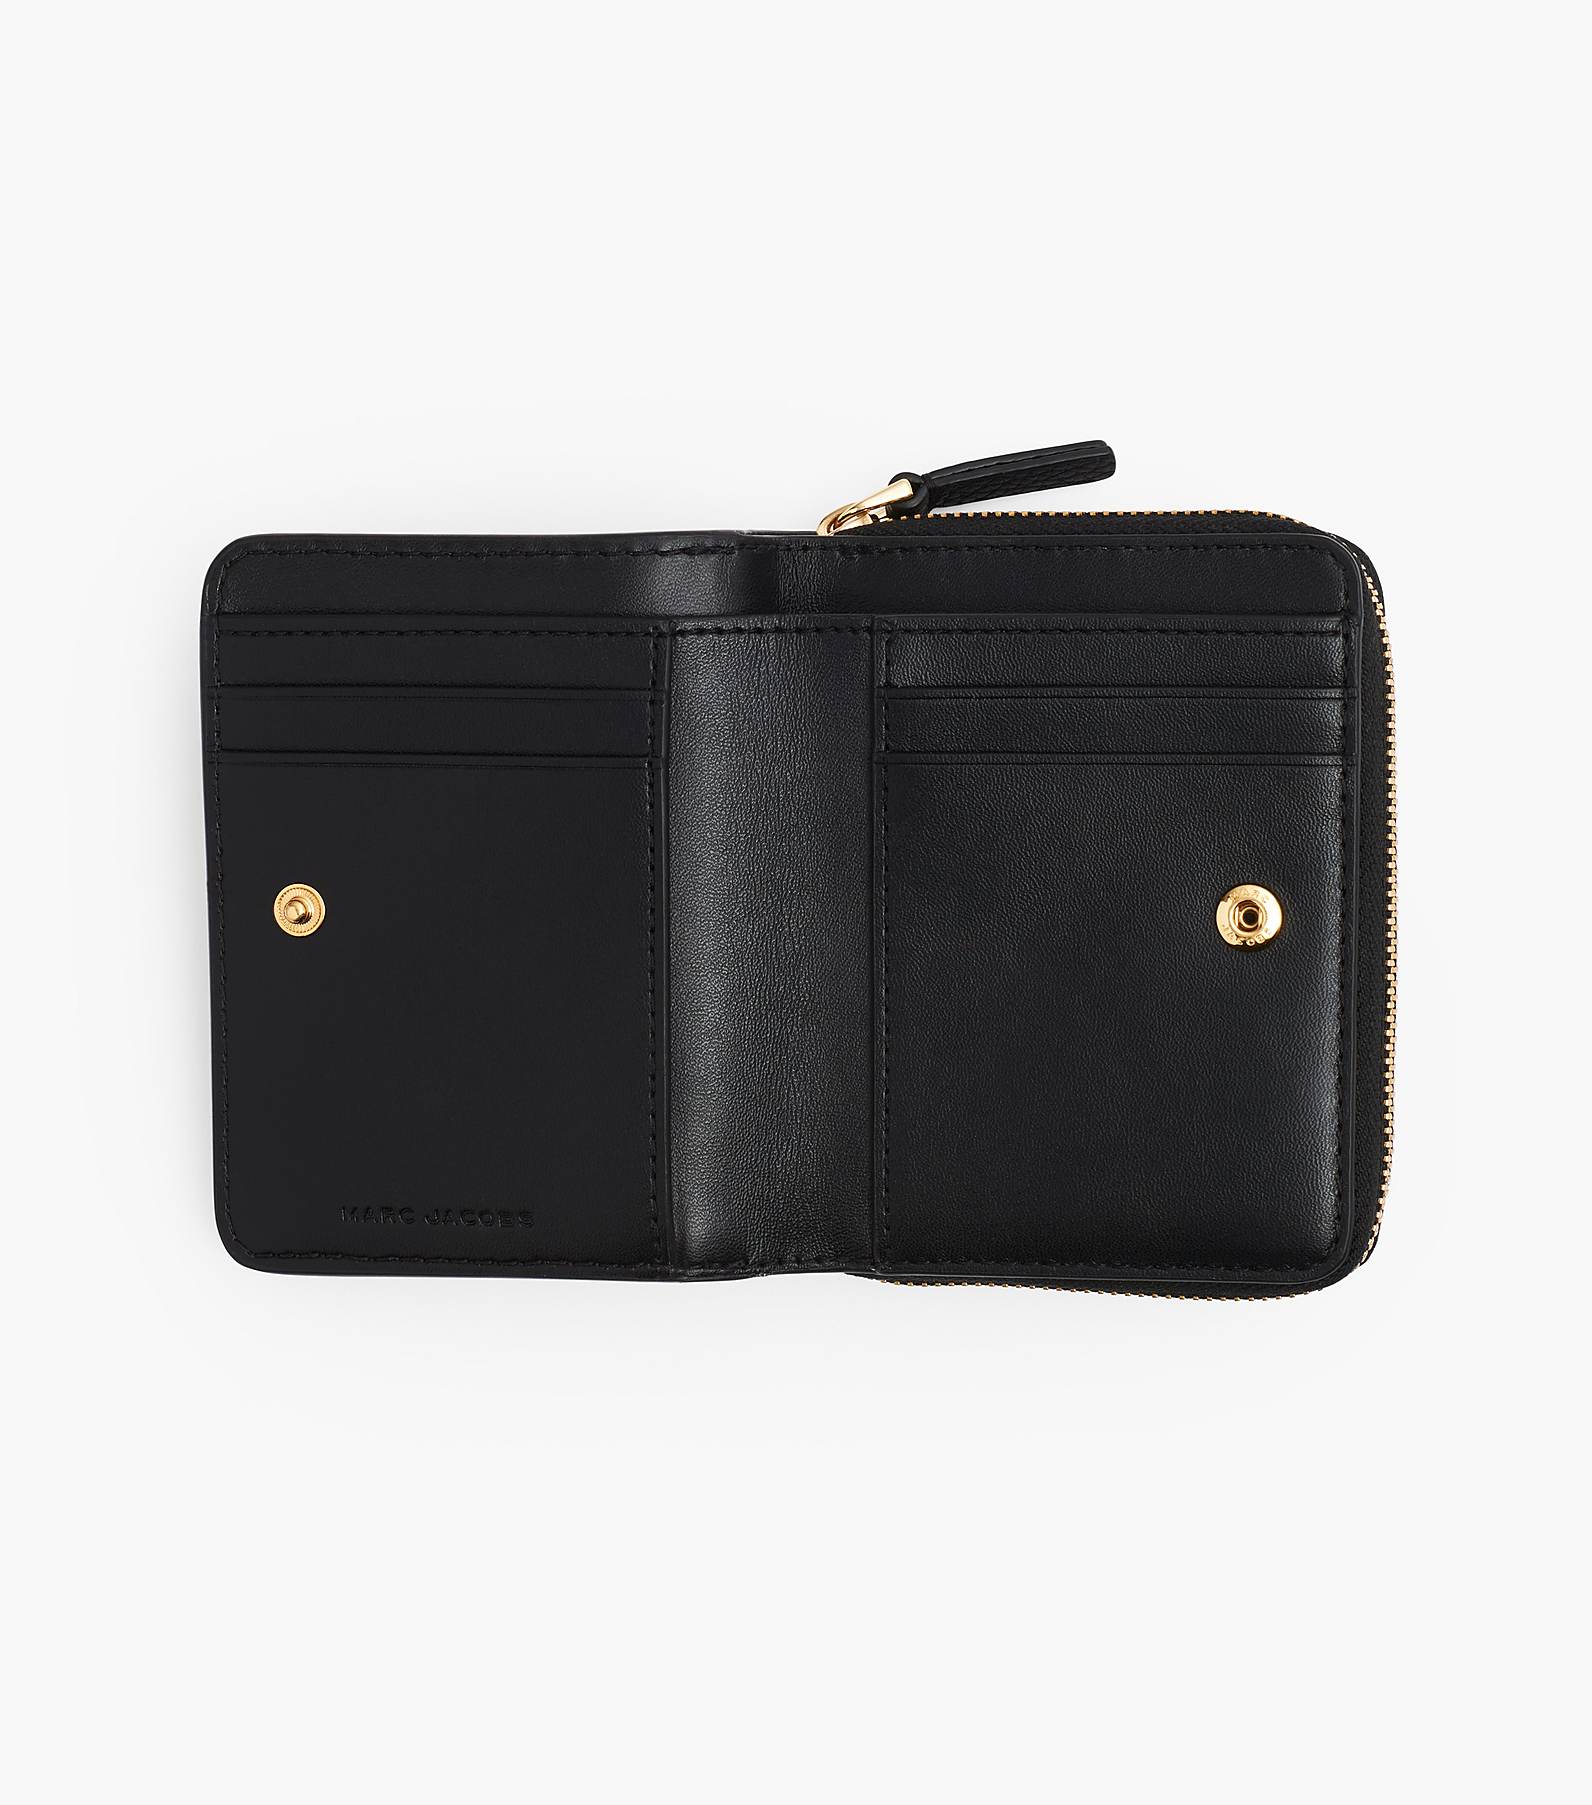 THE LEATHER COMPACT WALLET MINI